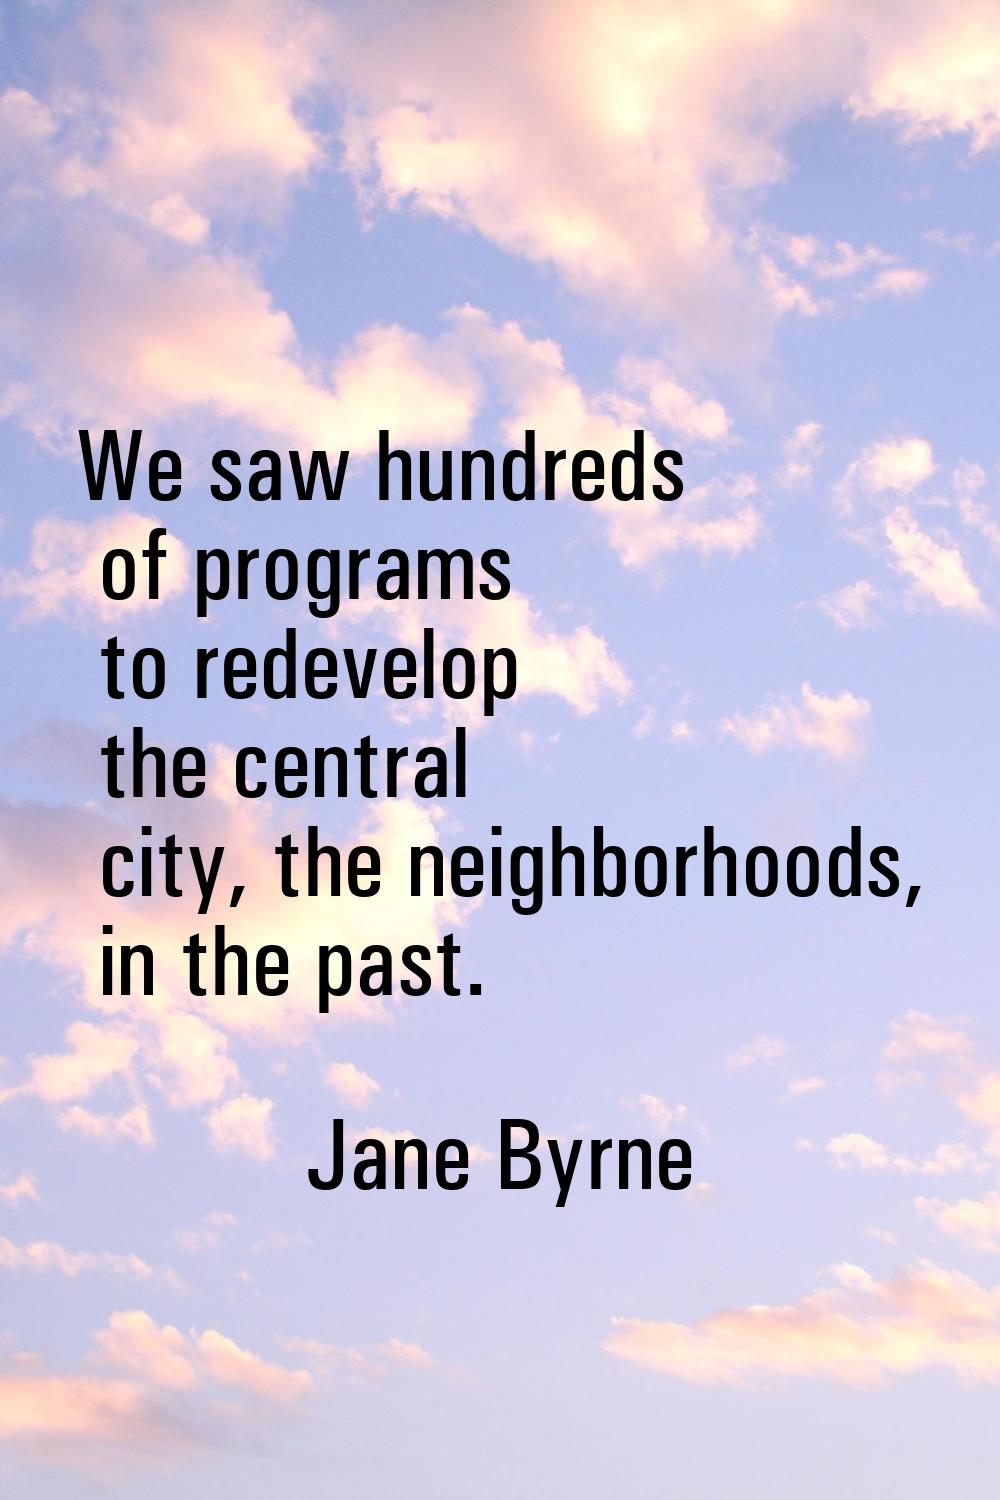 We saw hundreds of programs to redevelop the central city, the neighborhoods, in the past.